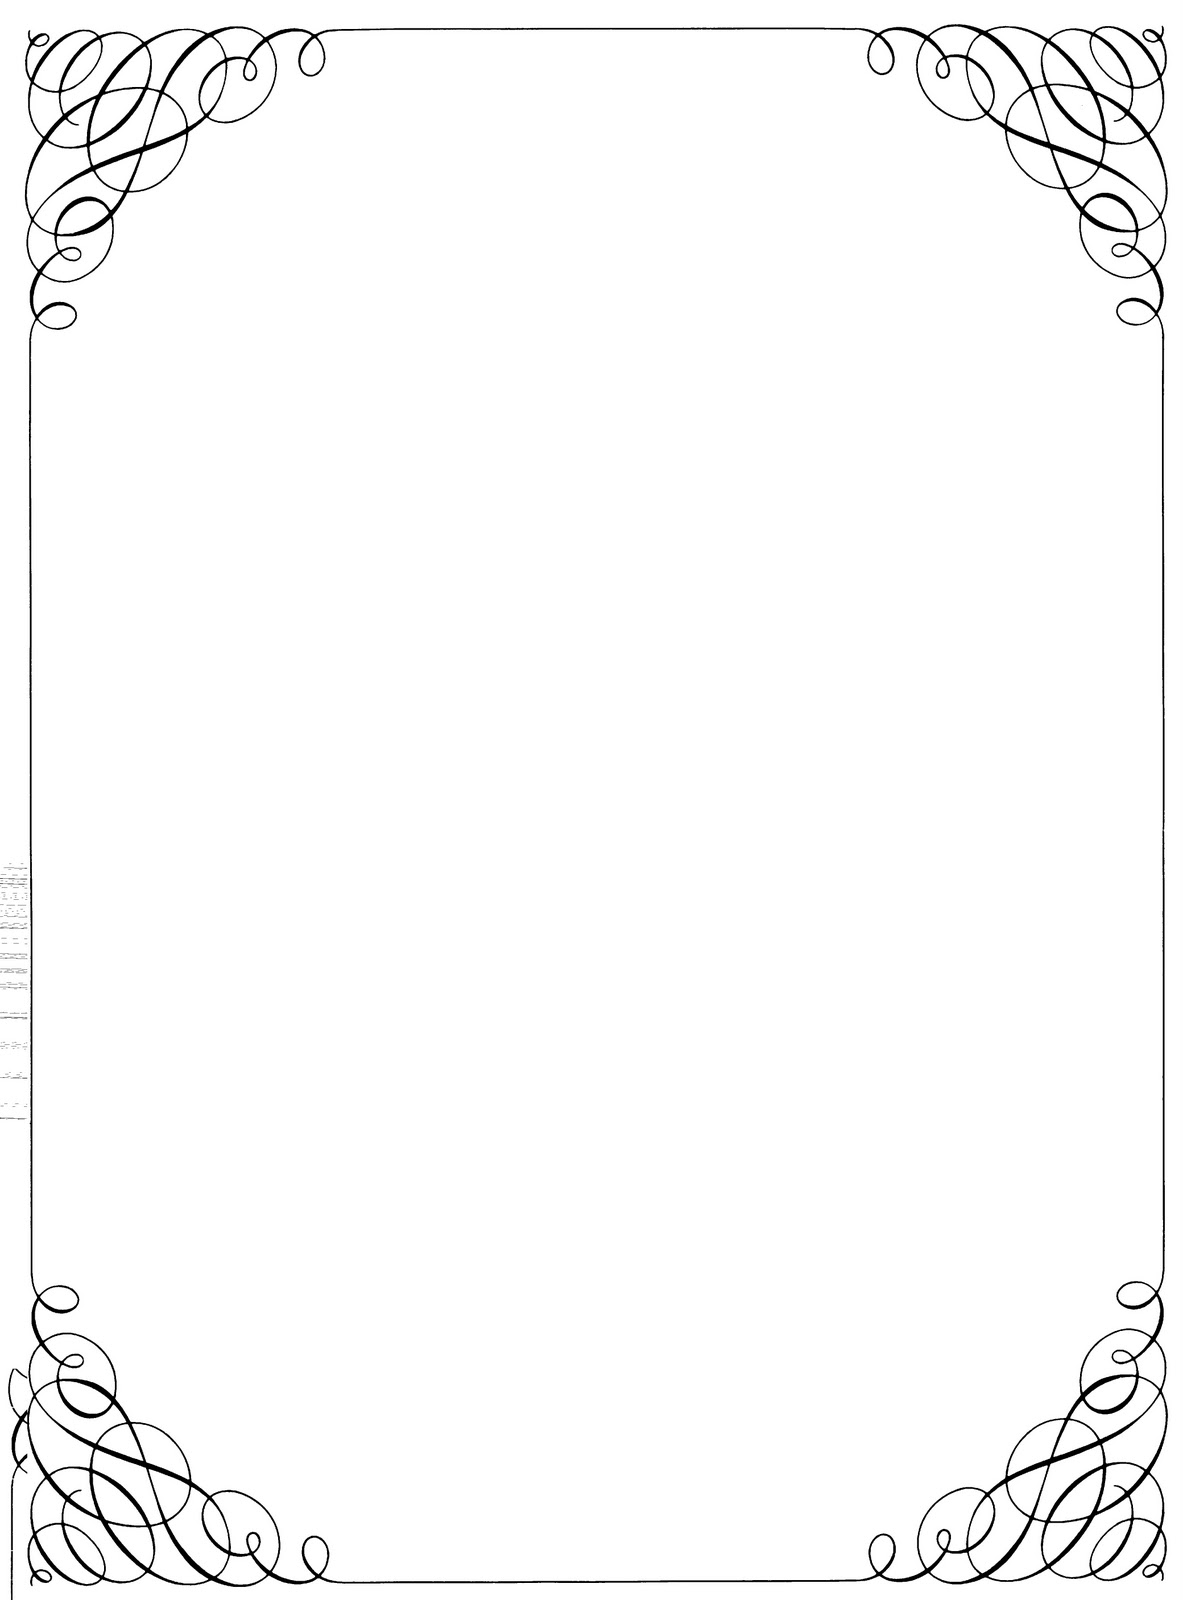 Free downloadable clip art borders 1 new hd template images 2